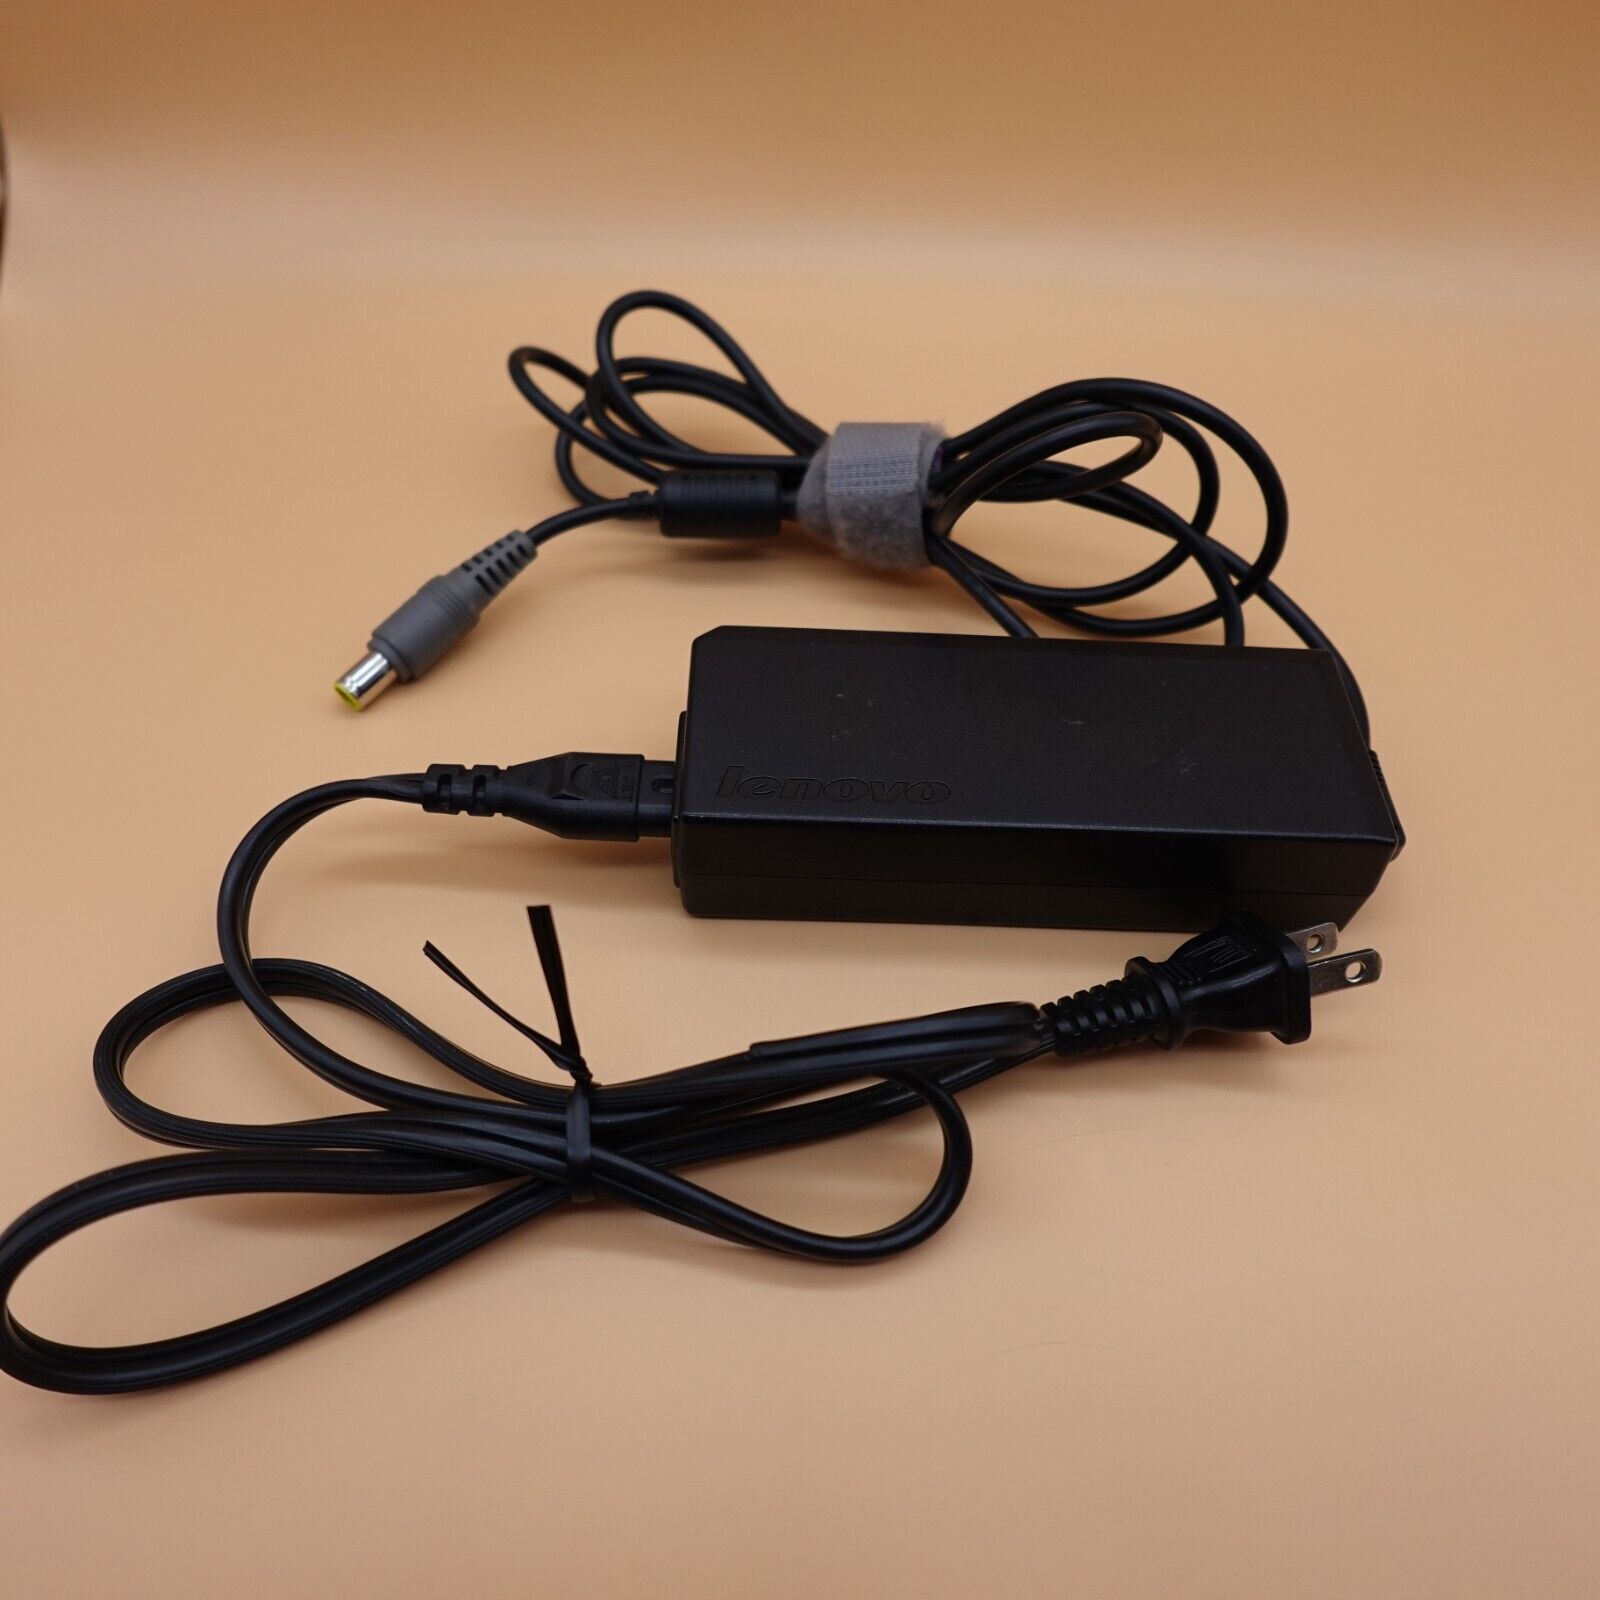 Lenovo Thinkpad Laptop Charger Genuine AC Adapter Power Supply 90W 20V 4.5A OEM